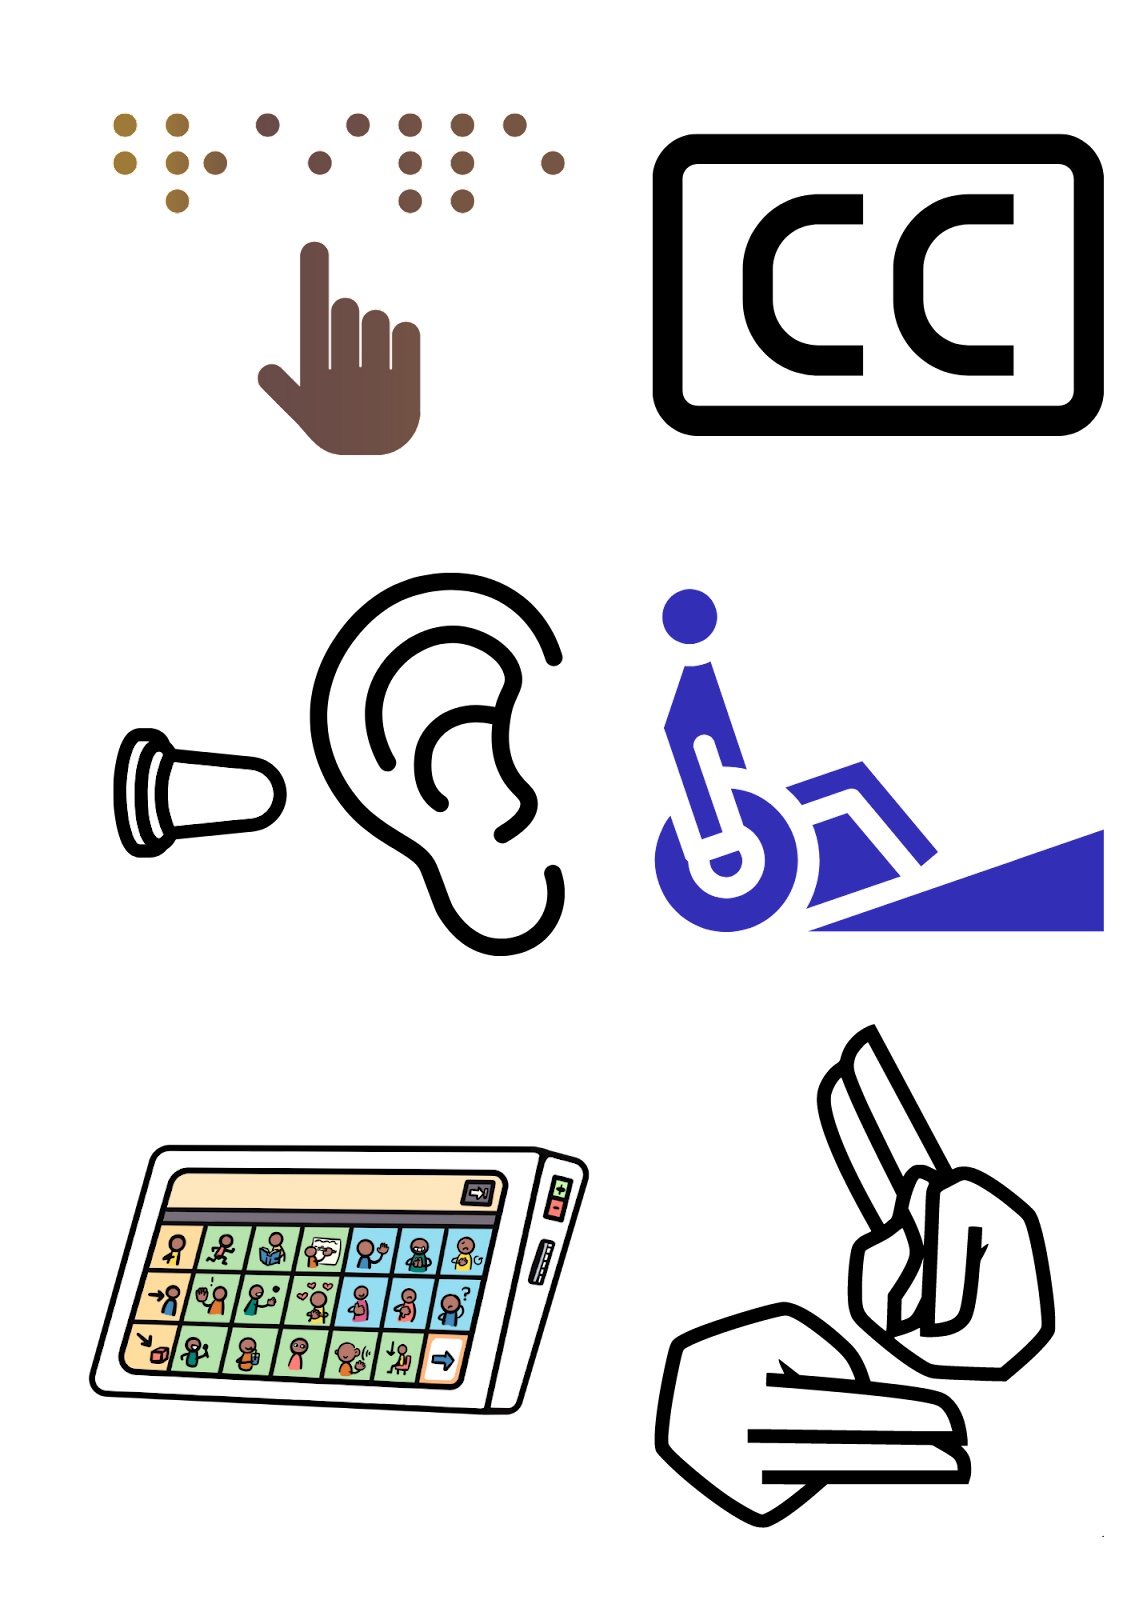 6 cartoon images of ways to make spaces accessible. The top row shows a brown hand below light and dark brown braille cells and a black box with the letters “CC” inside, representing braille writing and closed captioning. The second row shows a black cartoon of an ear and ear plug and a dark blue stick figure in a wheelchair using a ramp, representing sensory-friendly spaces and physical access tools. The bottom row shows a tablet with multicolored images on an augmentative and alternative communication (AAC) device and a cartoon of two hands signing, representing alternative communication, sign language, and interpretation.